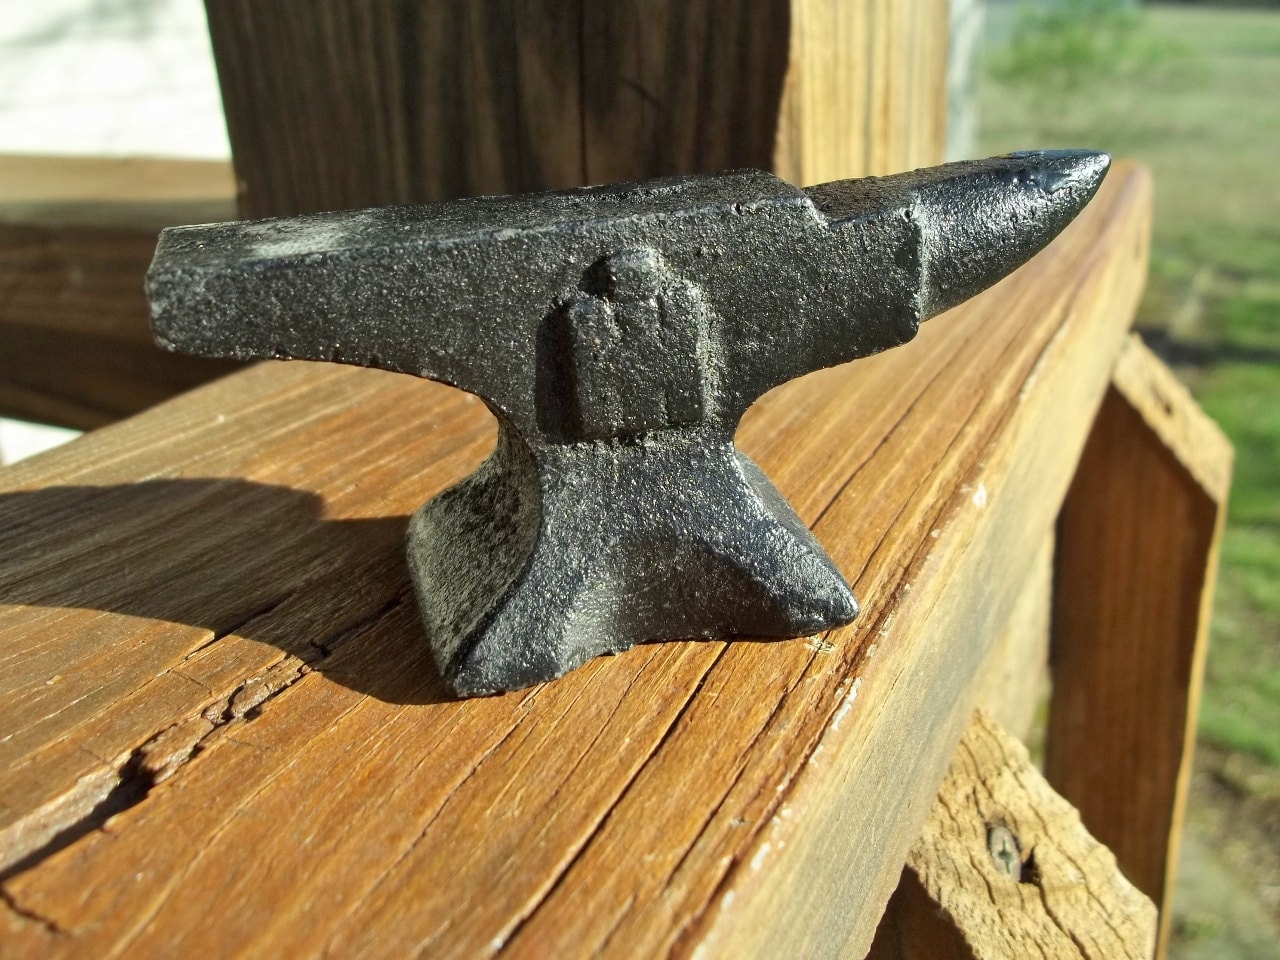 Small 8 Pound Mini Blacksmith Anvil • Clean Antique • Made By YETTER MFG.  CO.